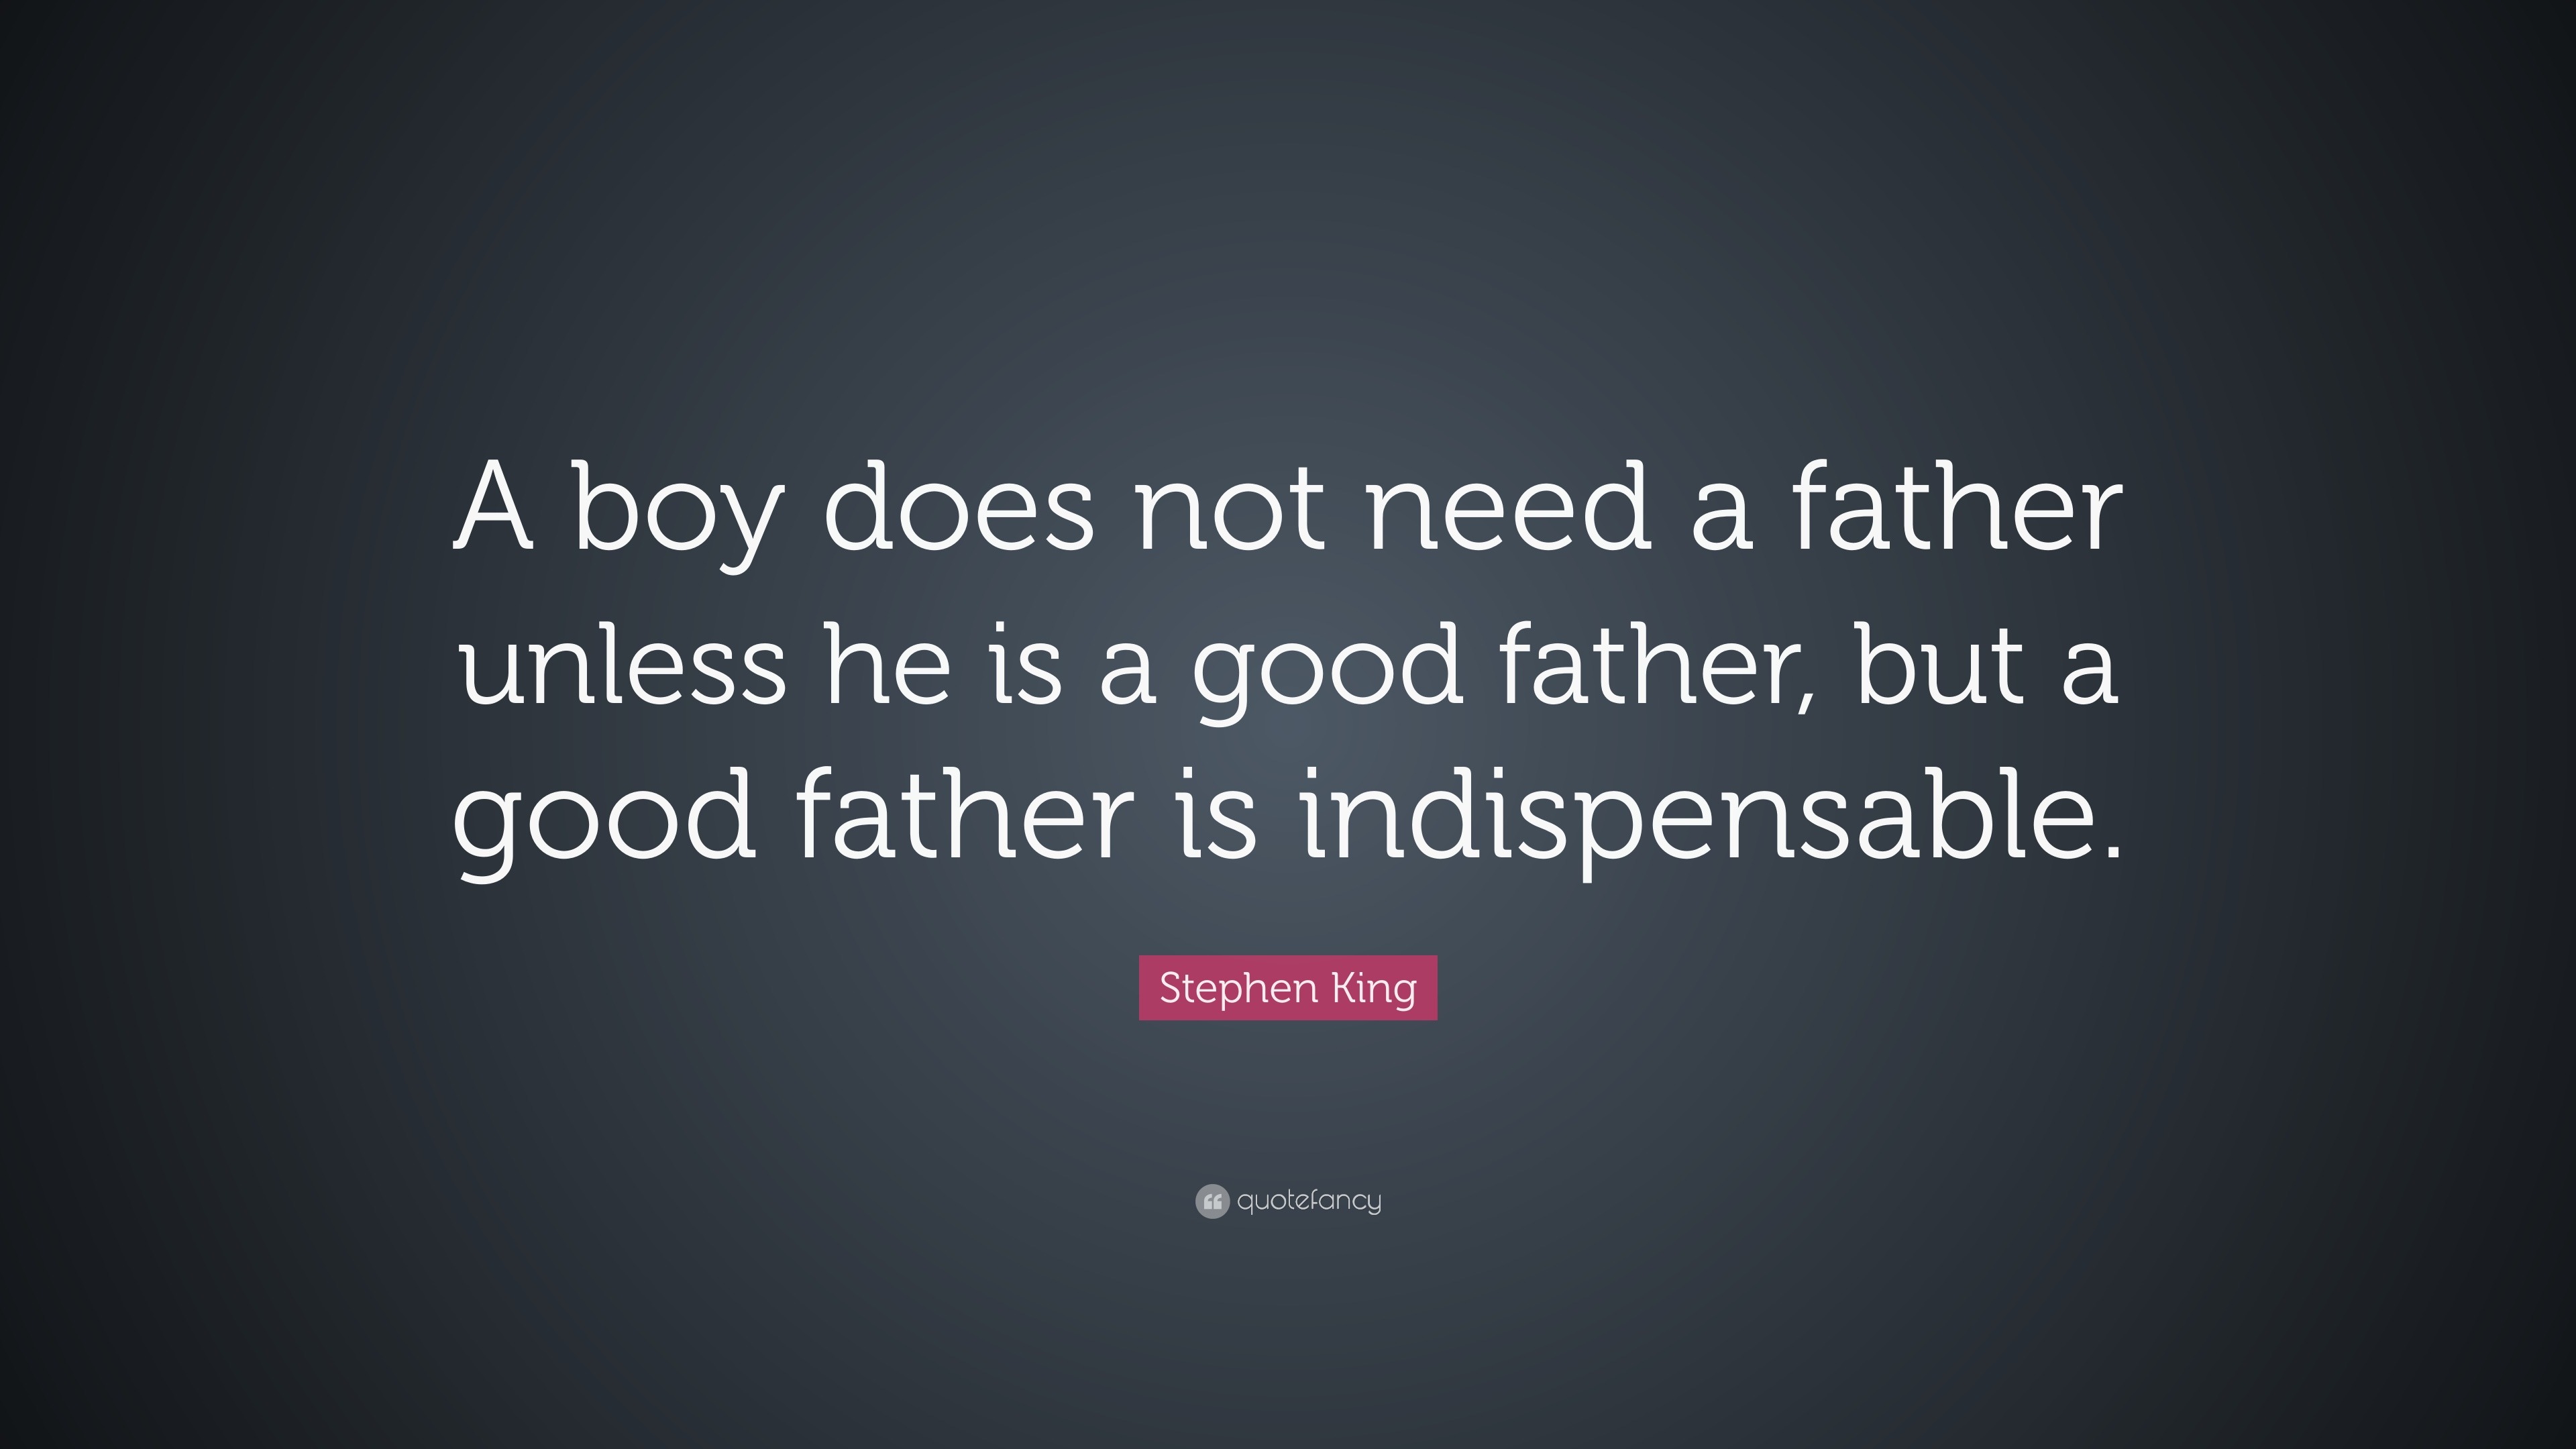 Father's Day Quotes (26 wallpapers) - Quotefancy